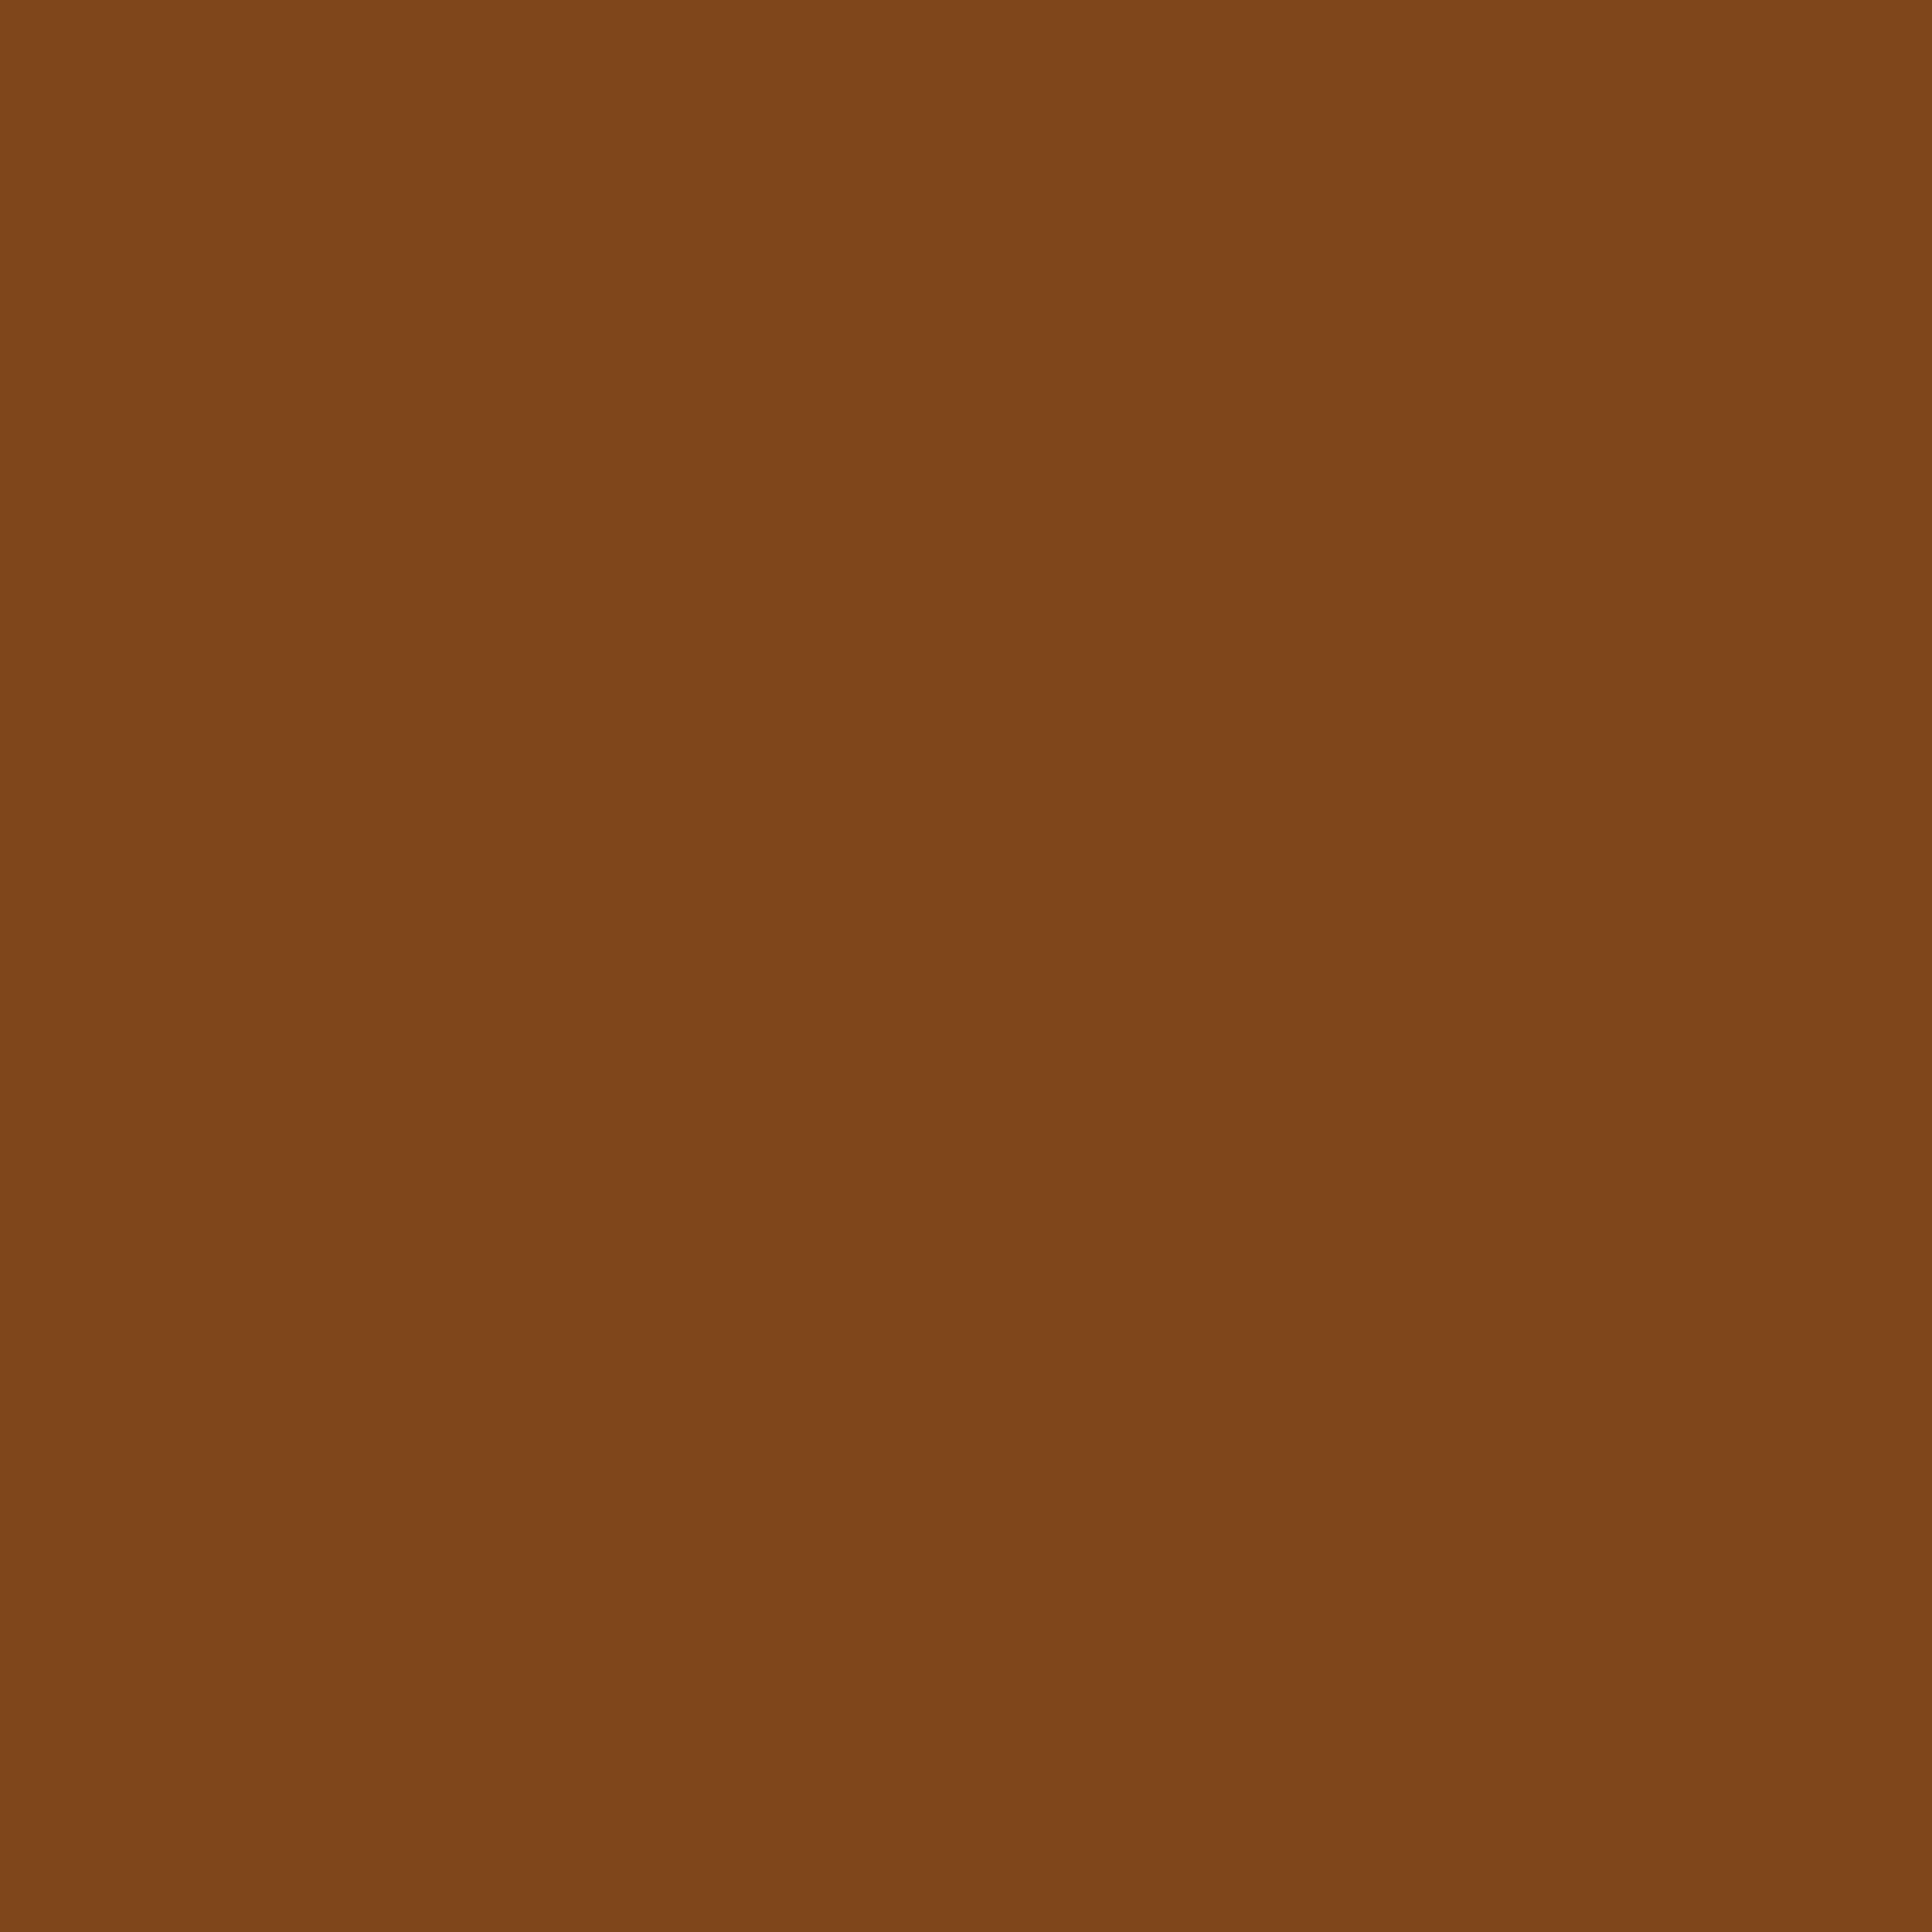 2048x2048 Russet Solid Color Background